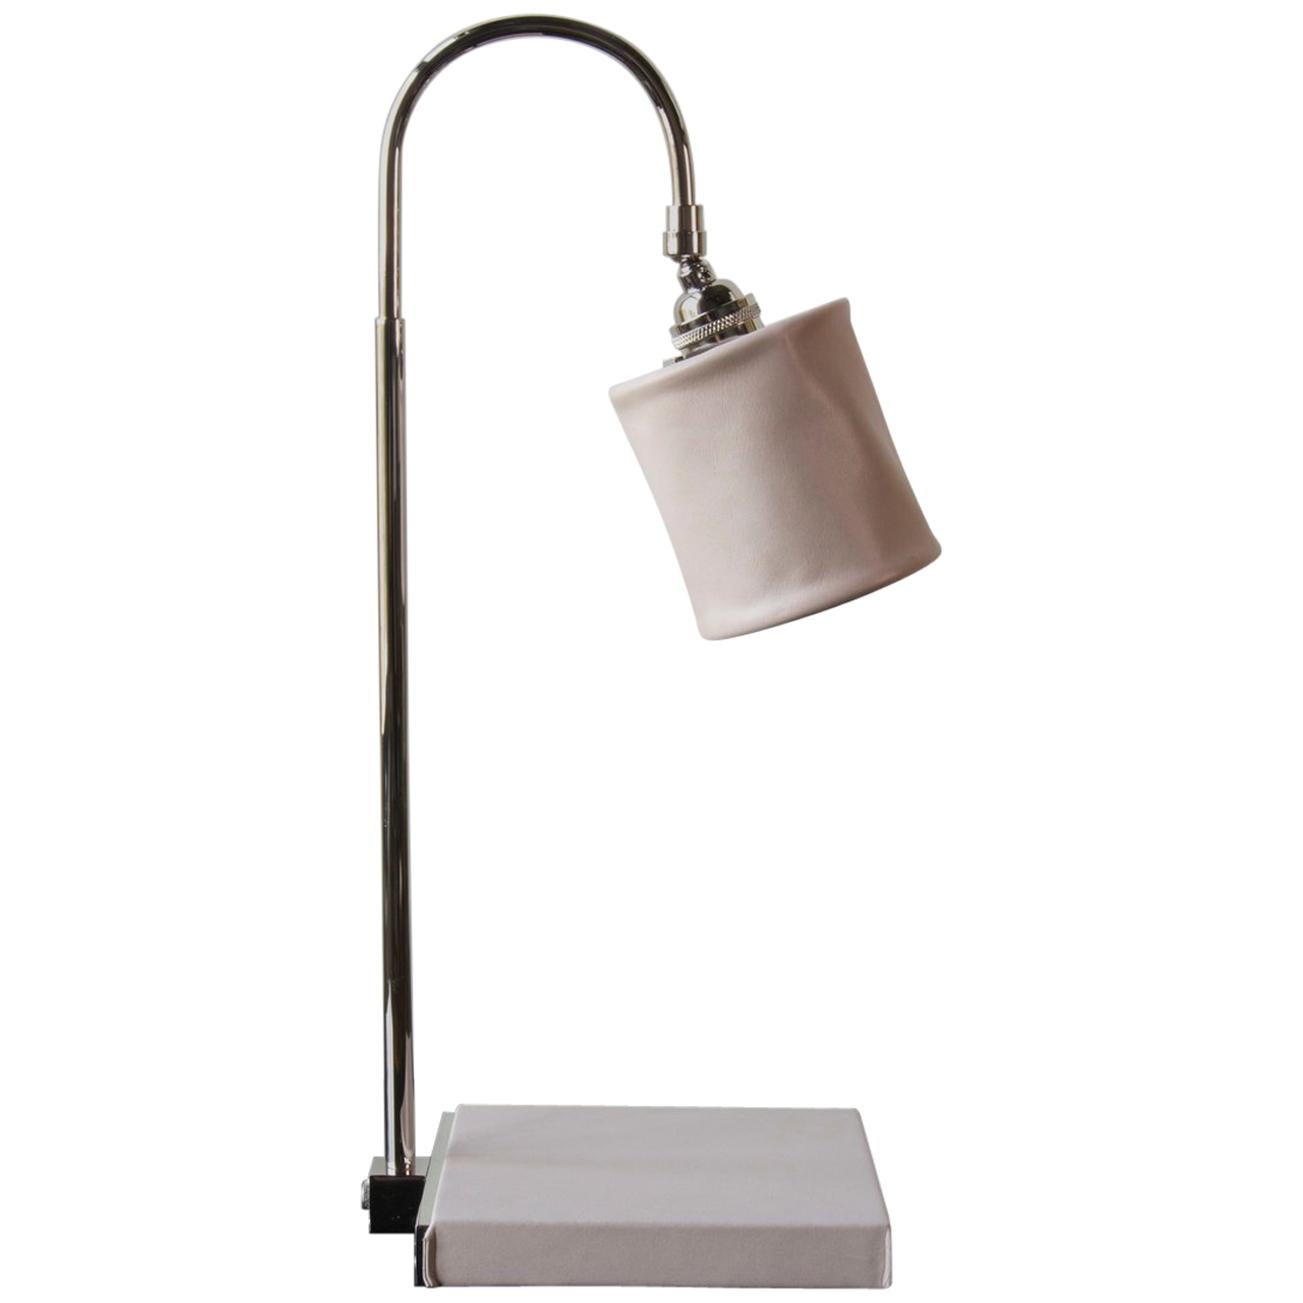 Series01 Desk Lamp, Hand-Dyed Blush 'Pink' Leather, Polished Nickel-Plated Brass